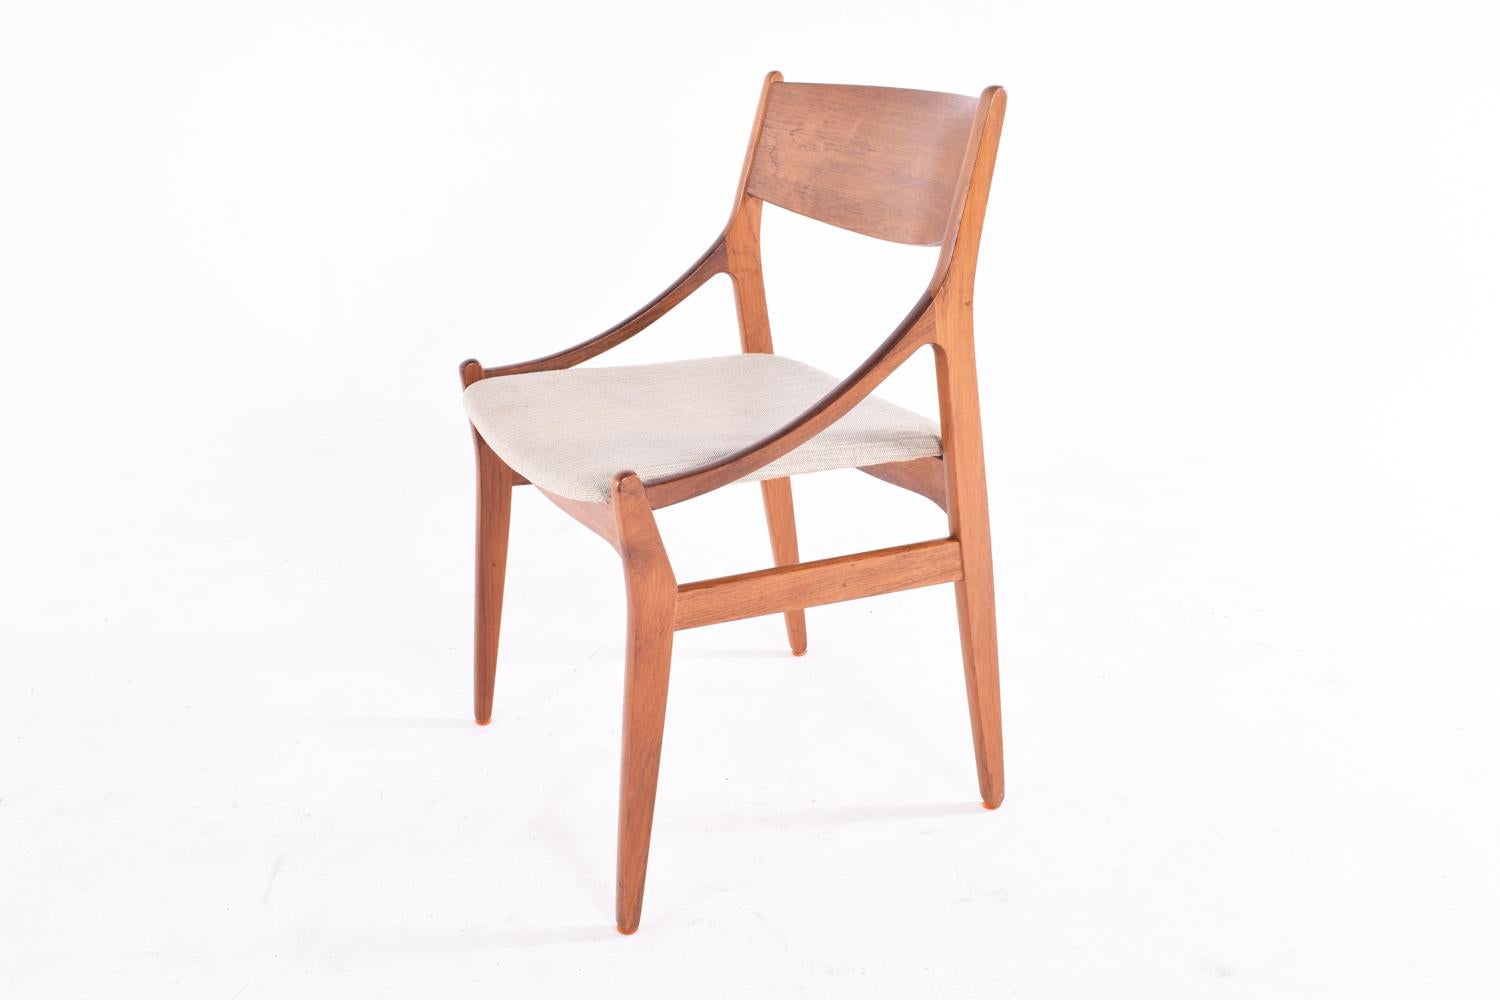 Fabric Midcentury Rosewood Dinning Chairs by Vestervig Erikson for Brdr. Tromborg